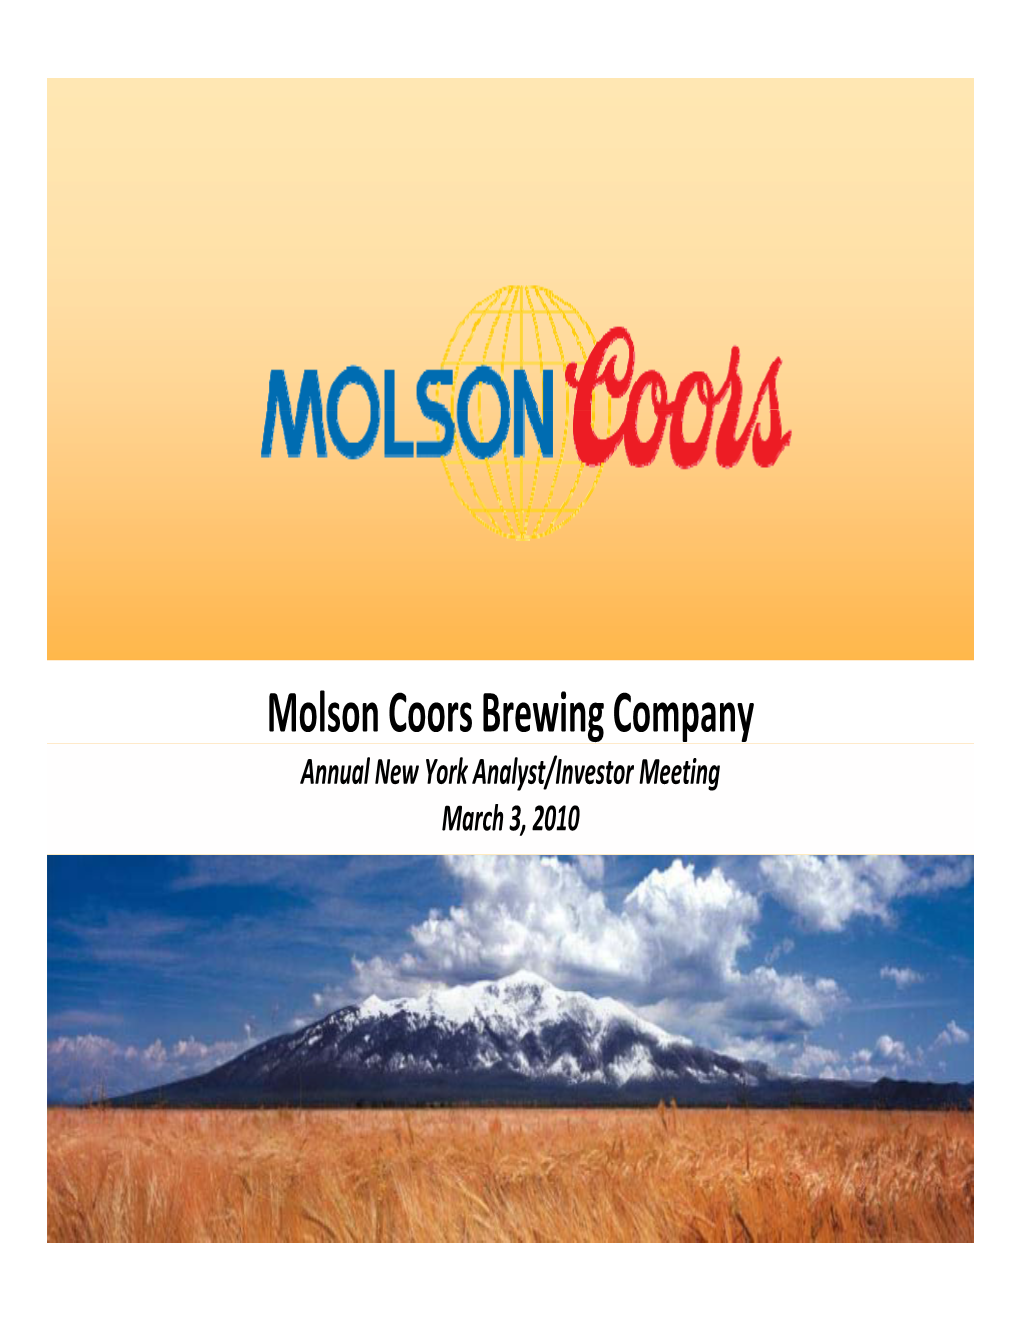 Molson Coors Brewing Company Annual New York Analyst/Investor Meeting March 3, 2010 2 Peter Swinburn Chief Executive Officer, Molson Coors